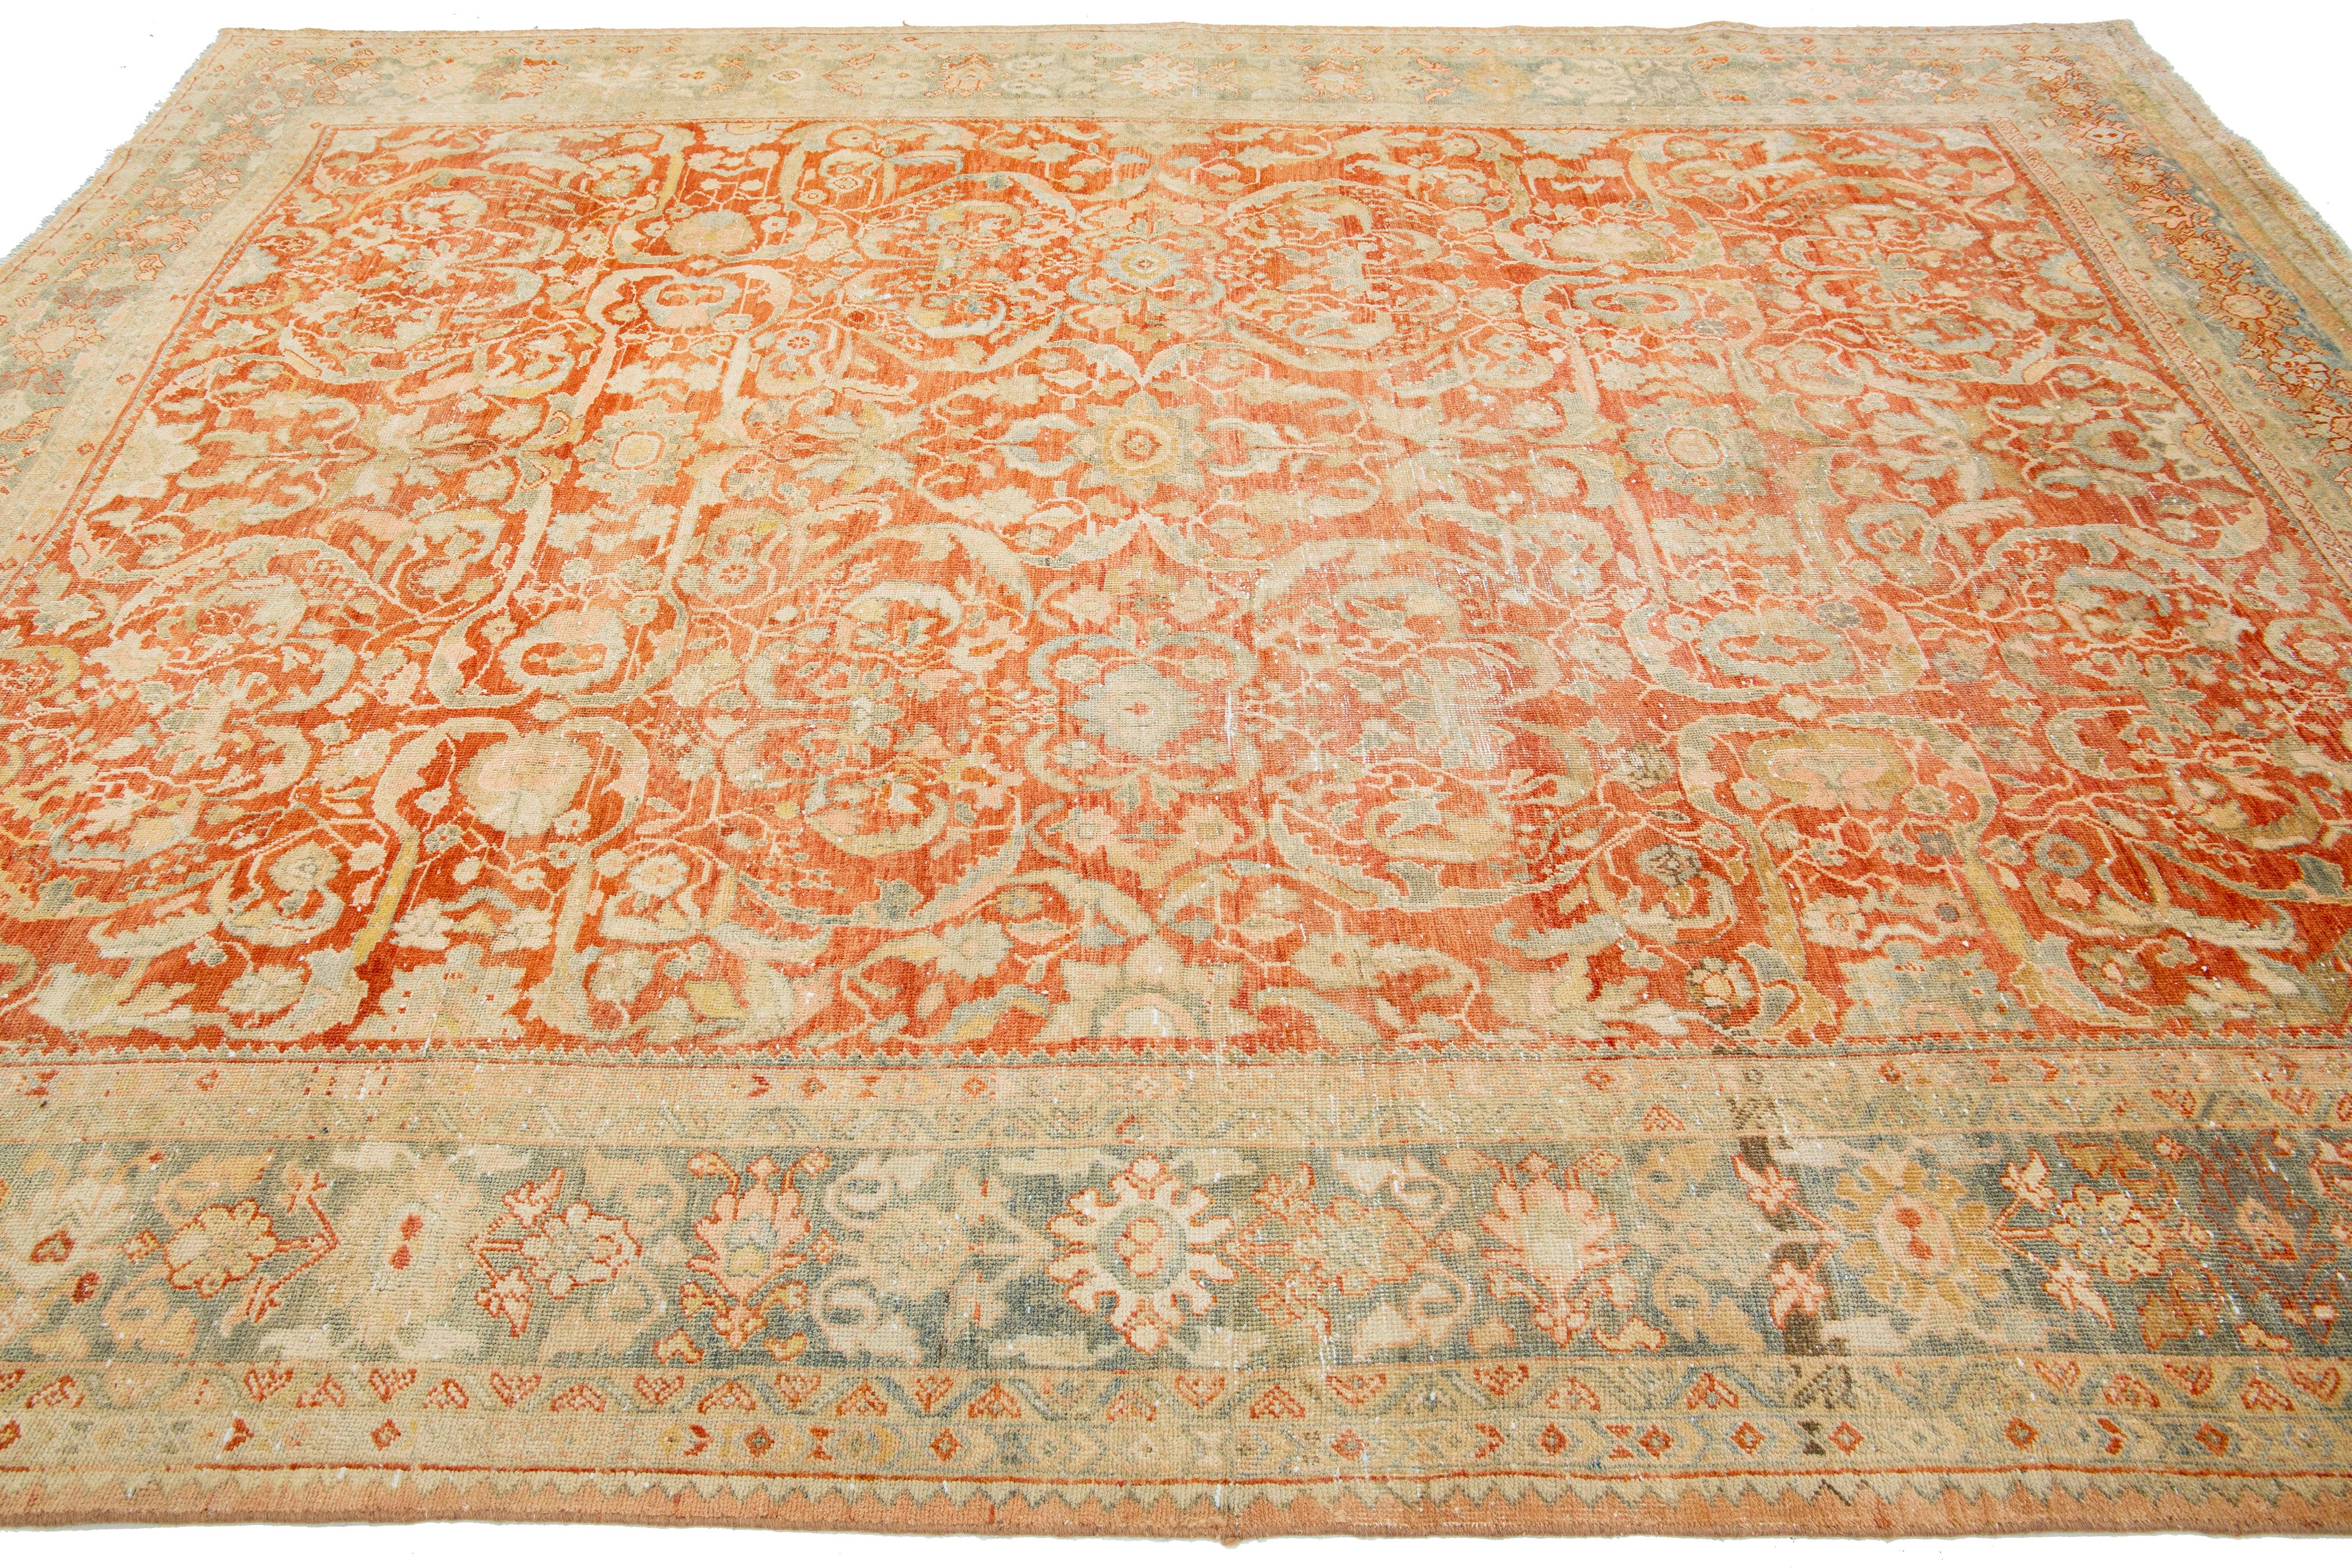 Early 20th Century 1920s Antique Persian Heriz Wool Rug In Rust With Allover Floral Design  For Sale